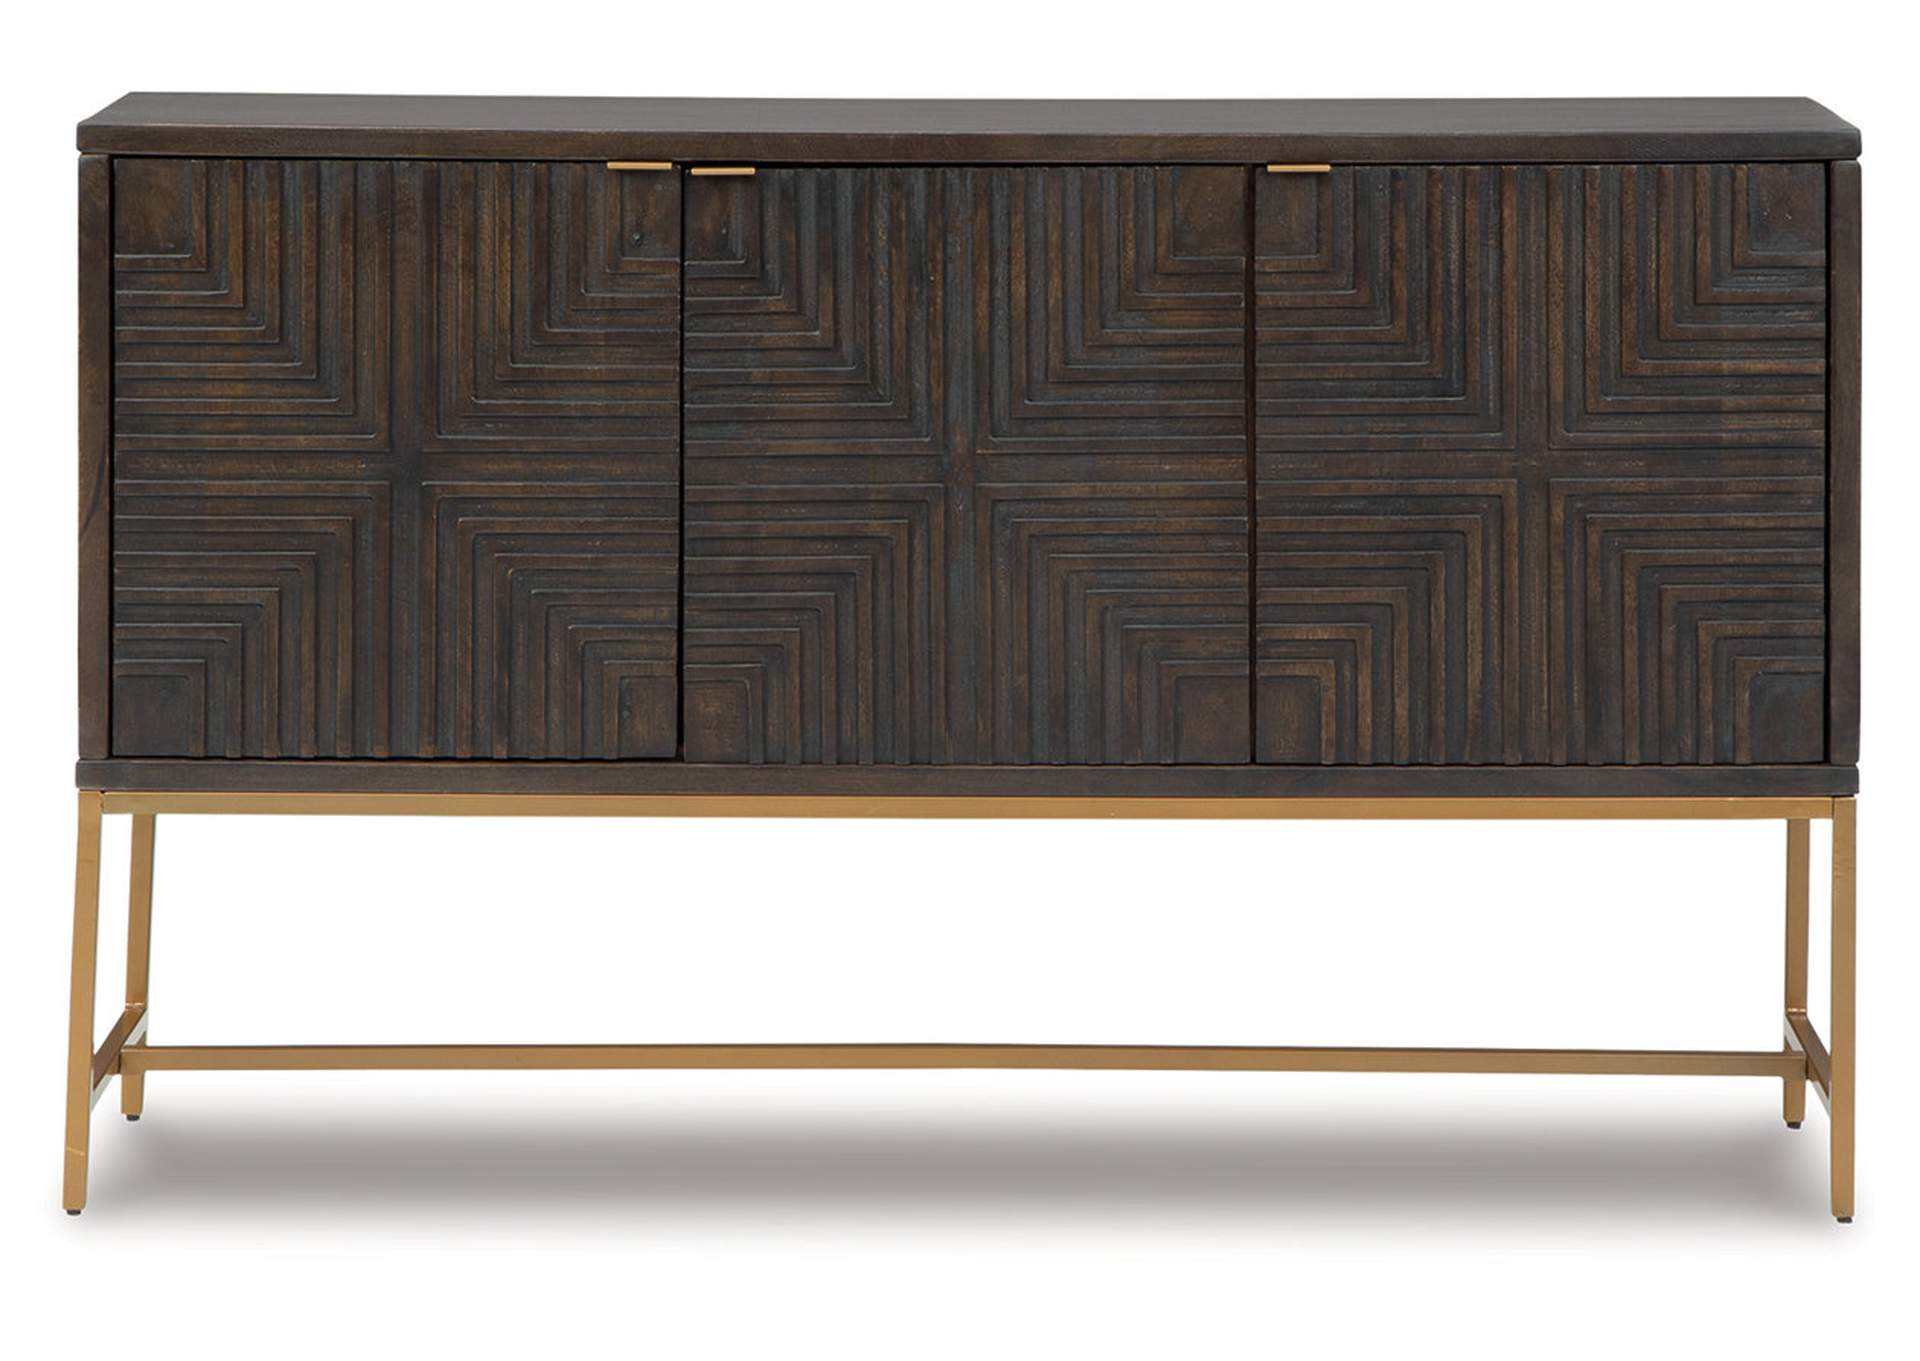 Elinmore Accent Cabinet,Signature Design By Ashley